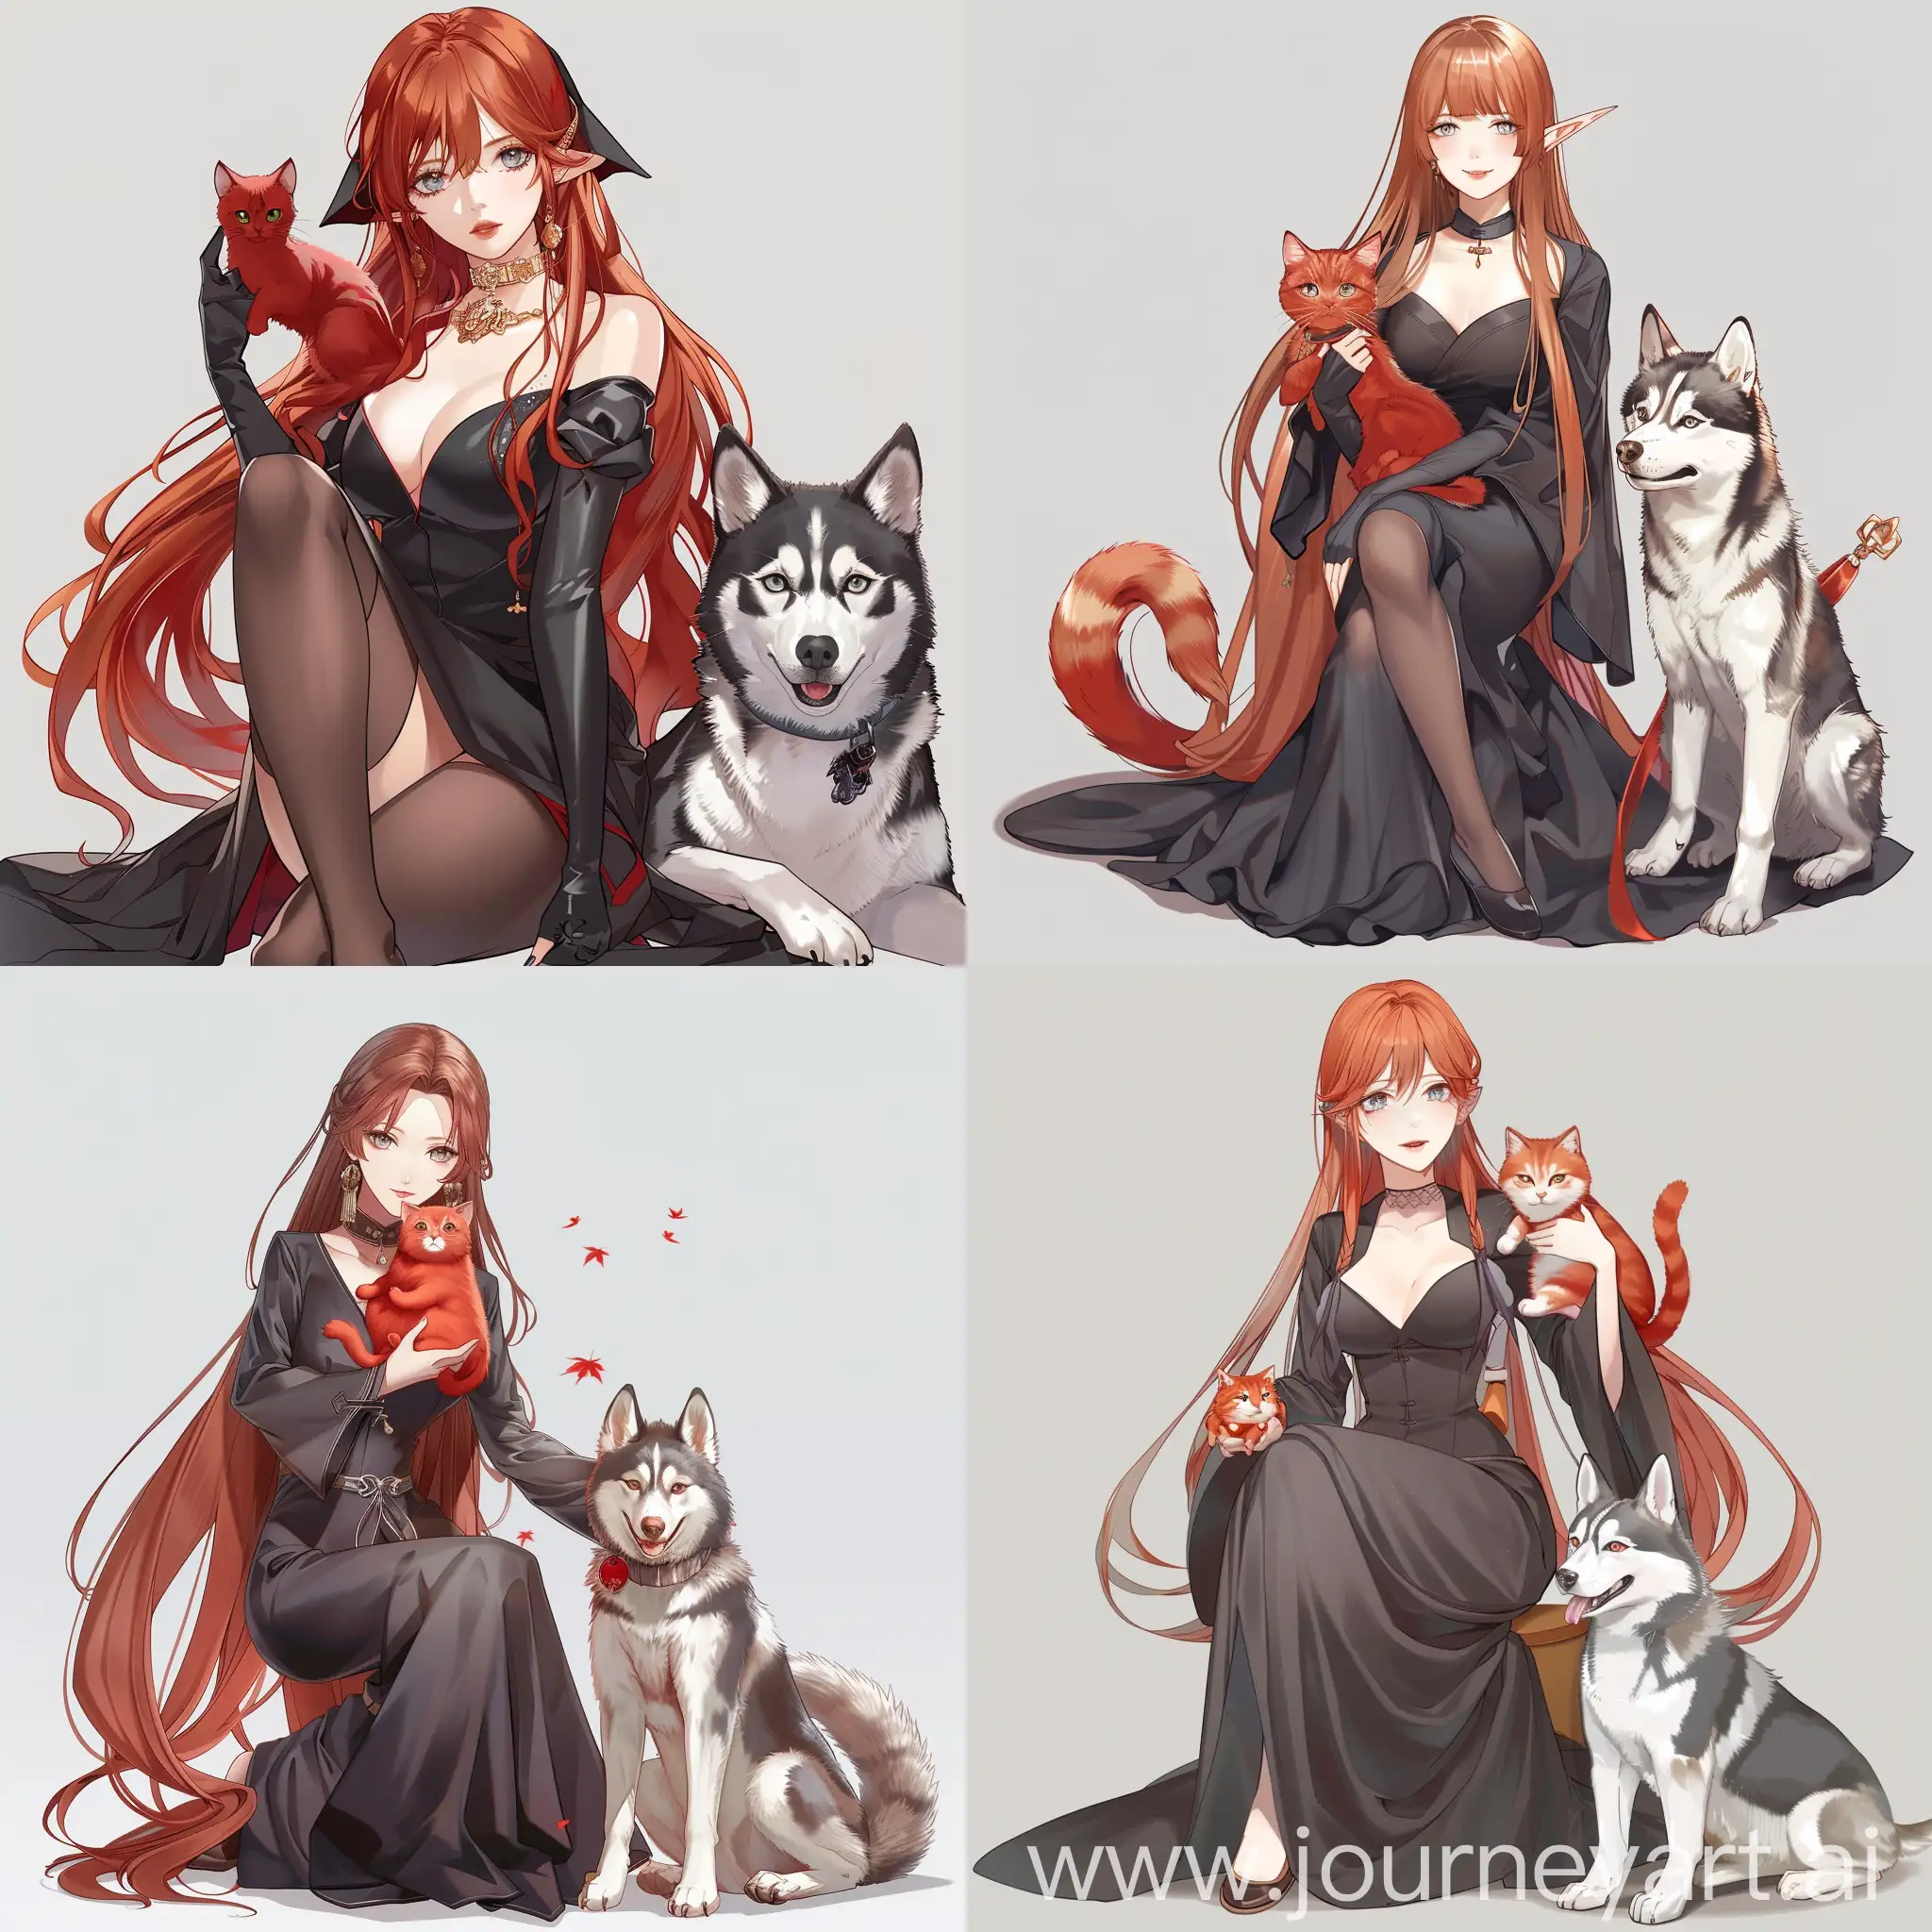 A cute witch, with long red hair, gray eyes, dressed in a fashionable tight black qipao with long sleeves, holding a red cat in her arms and a Husky dog sitting next to them, capture in an anime style